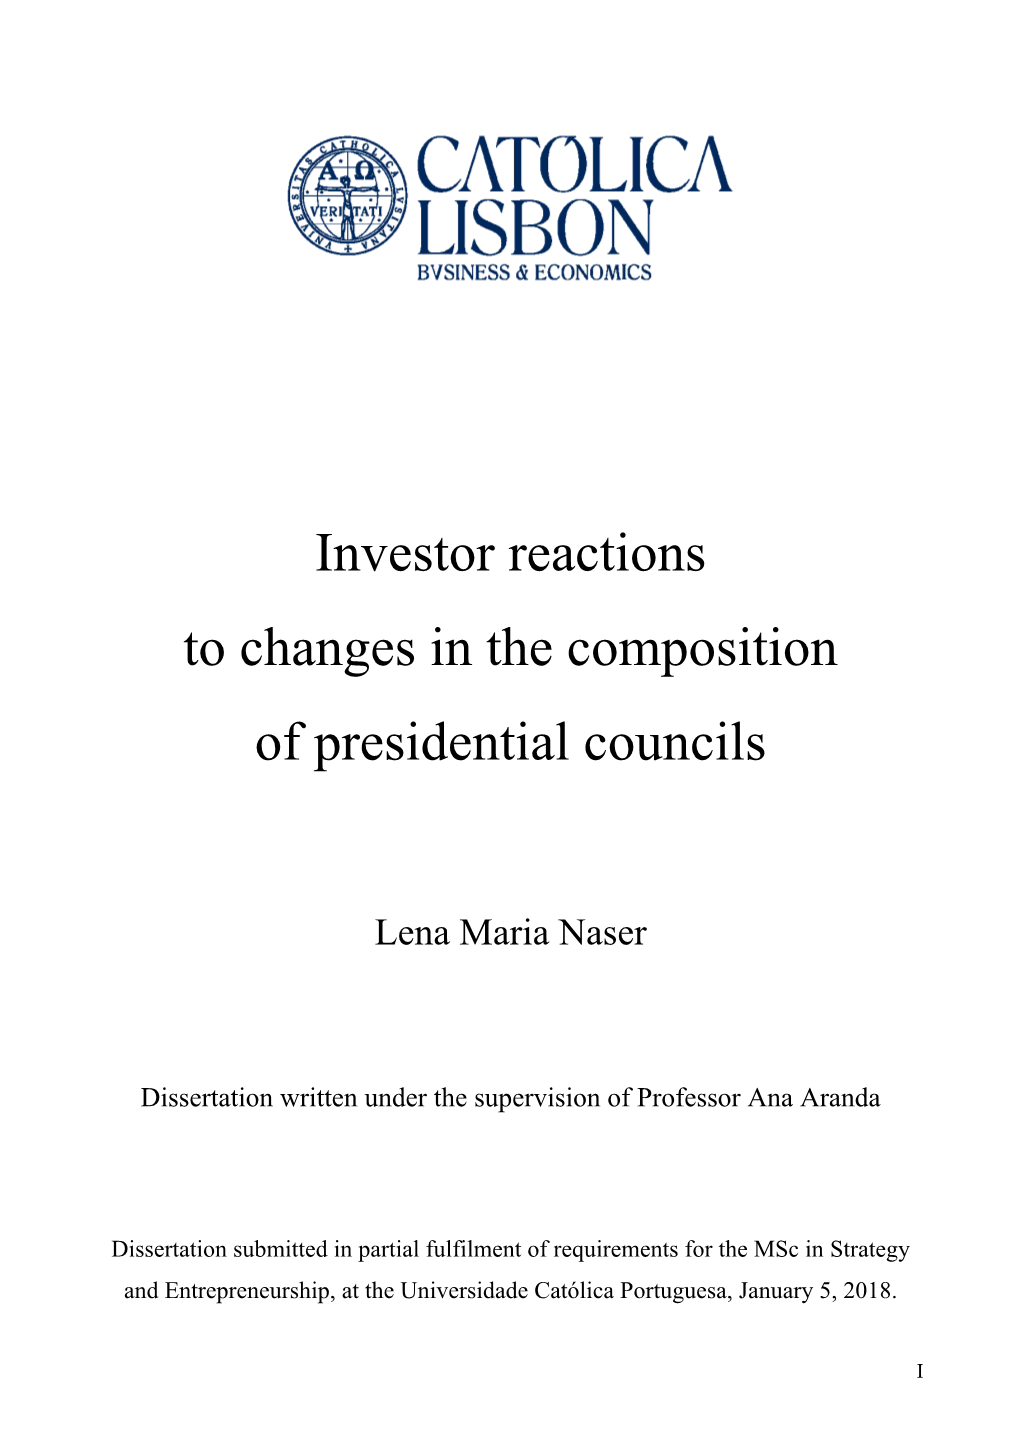 Investor Reactions to Changes in the Composition of Presidential Councils